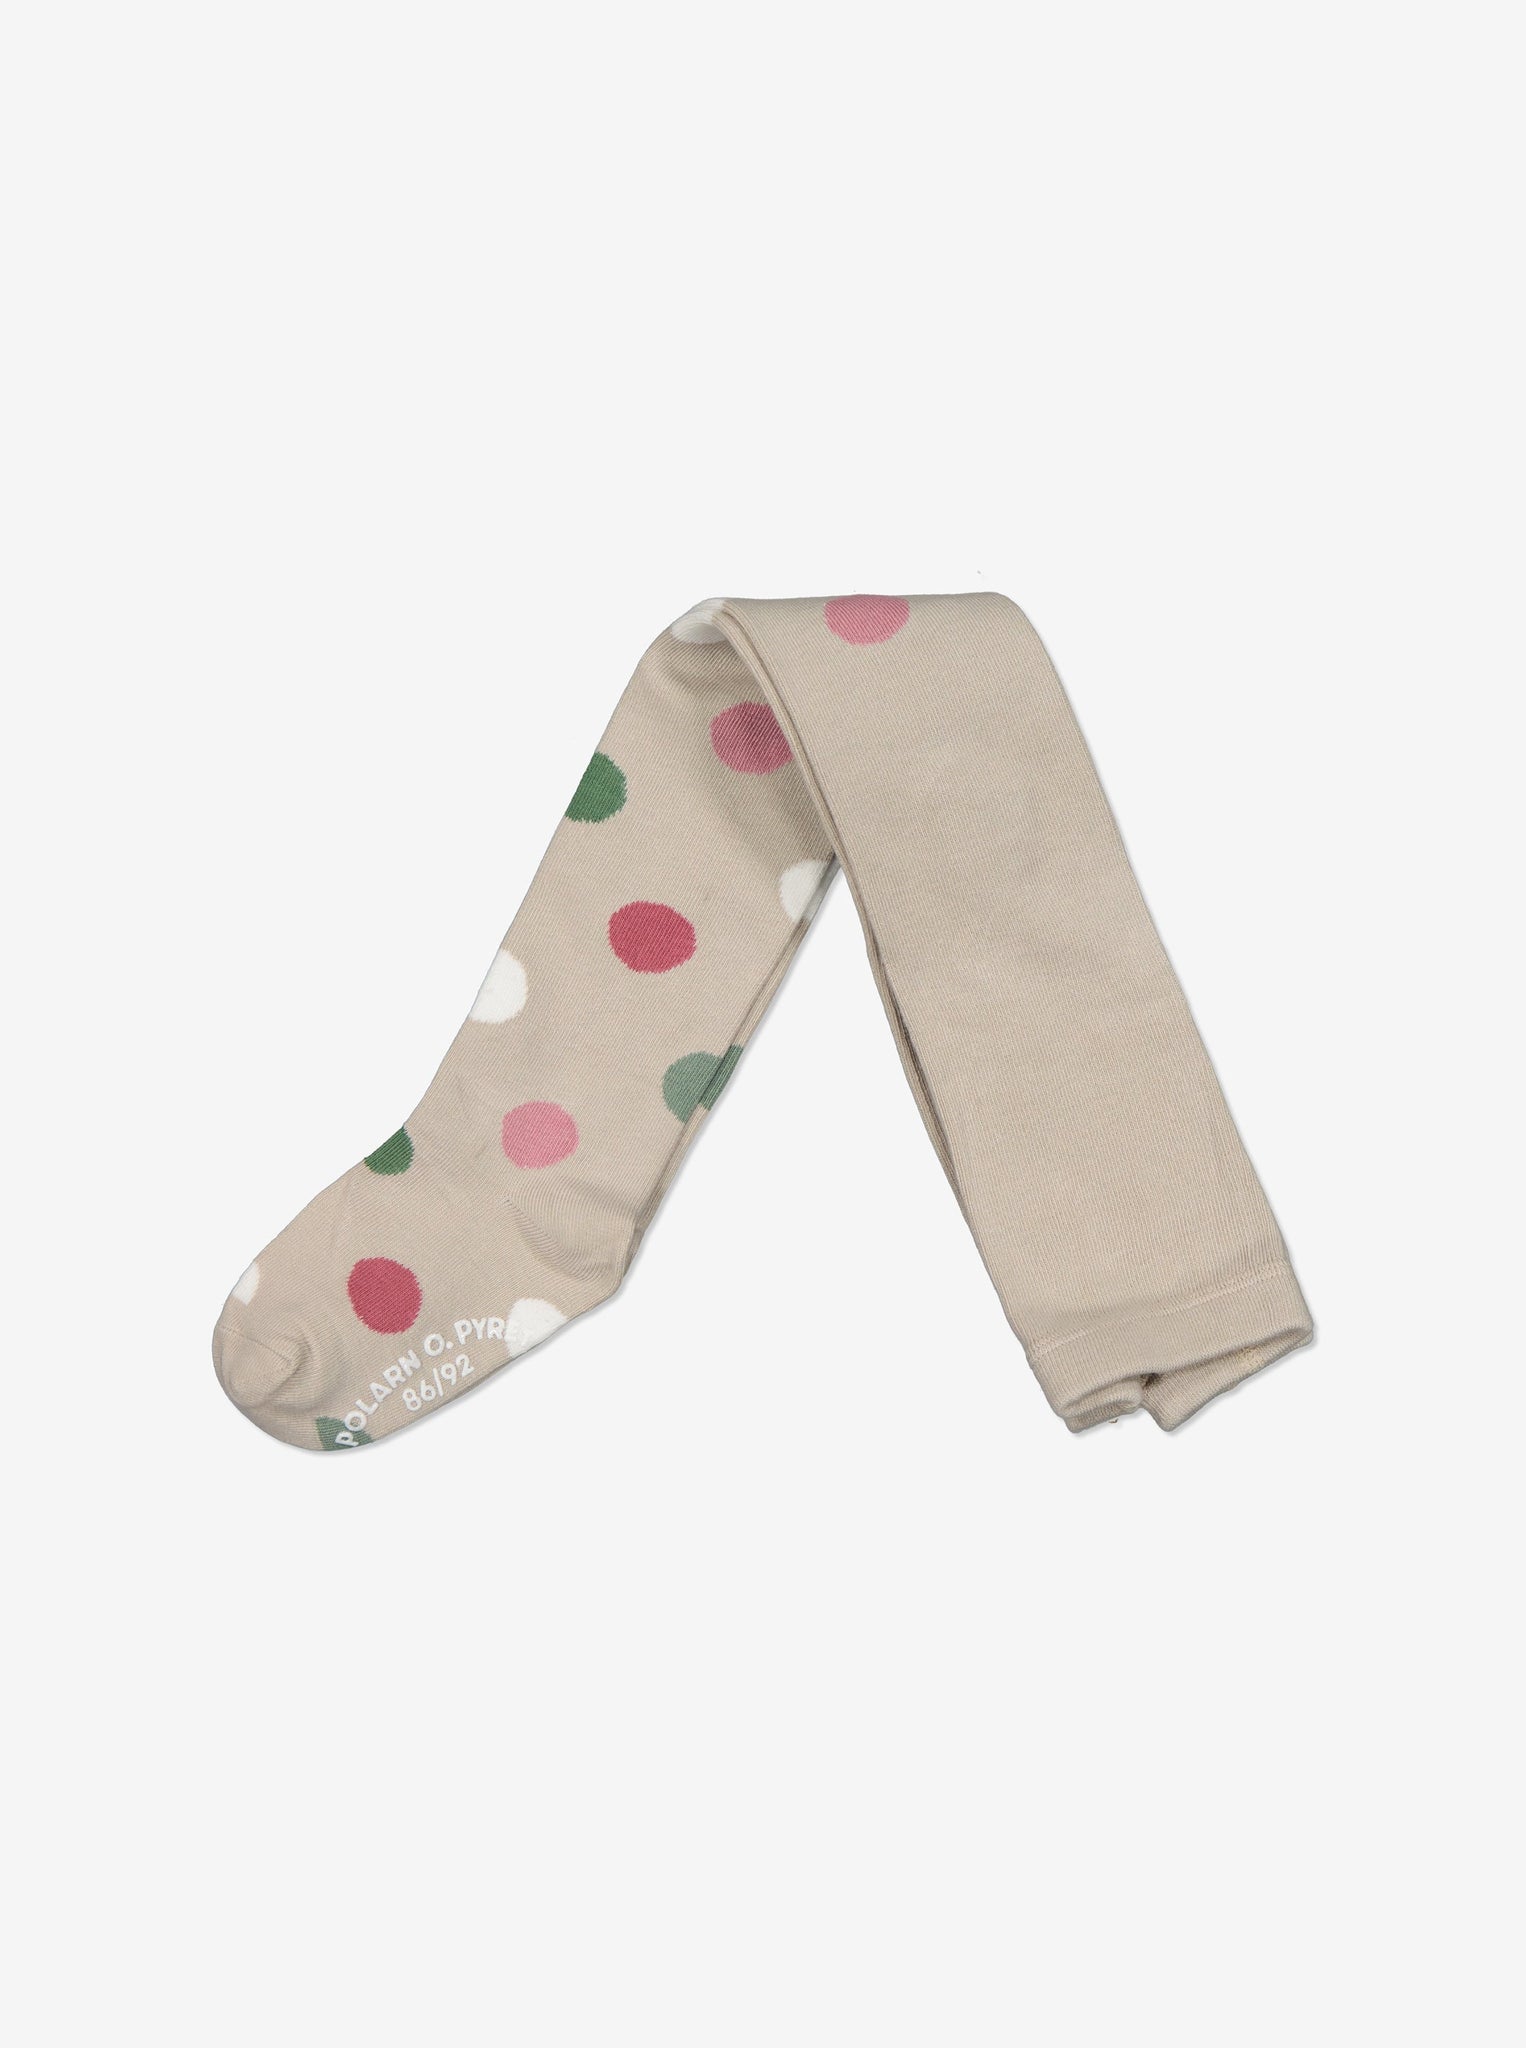 Polka Dot Beige Ribbed Baby Tights from the Polarn O. Pyret Kidswear collection. Ethically produced kids clothing.